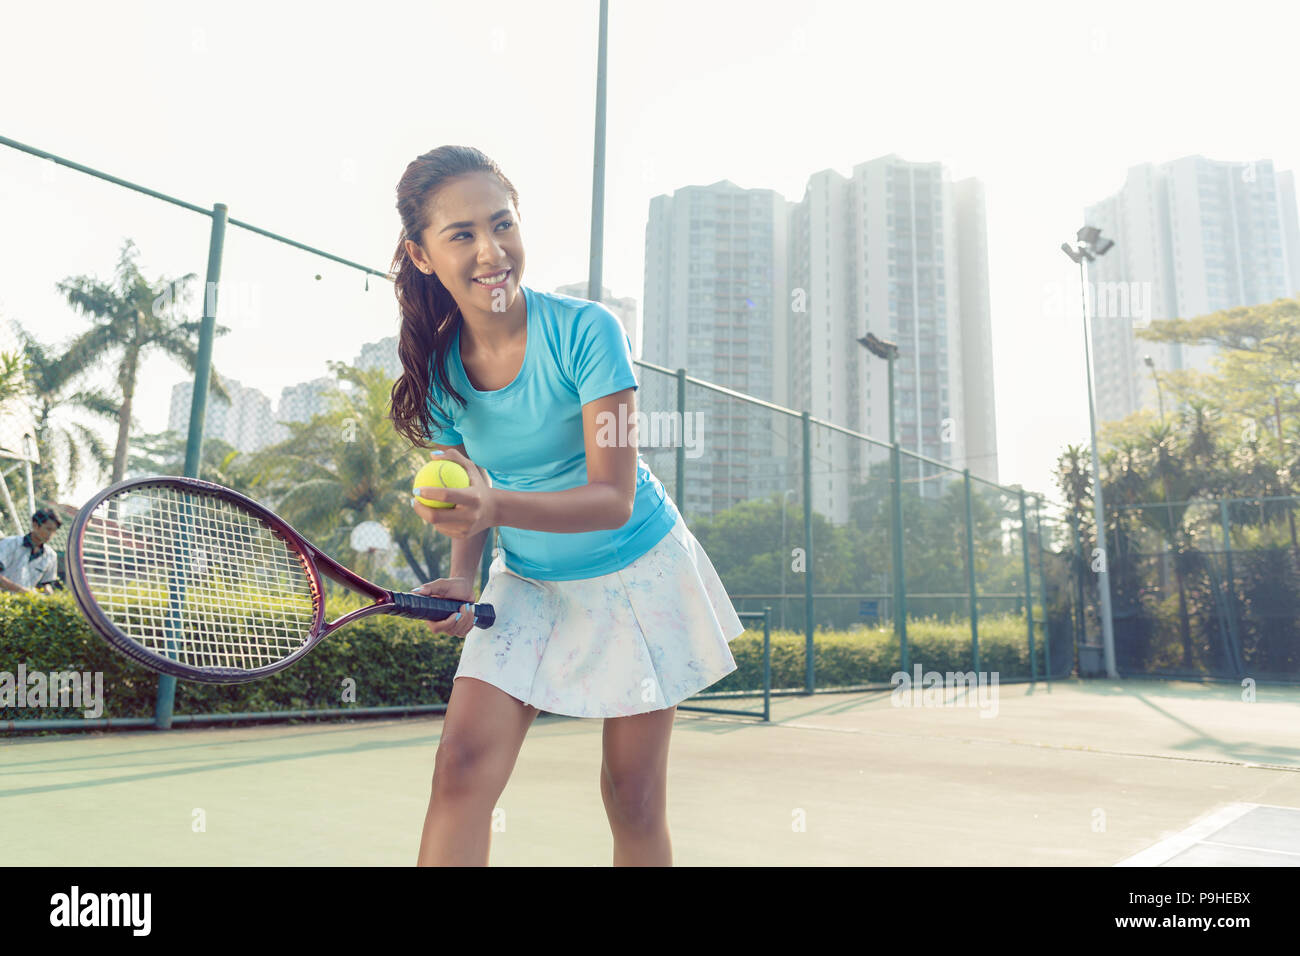 Professional female player smiling while serving during tennis match Stock Photo